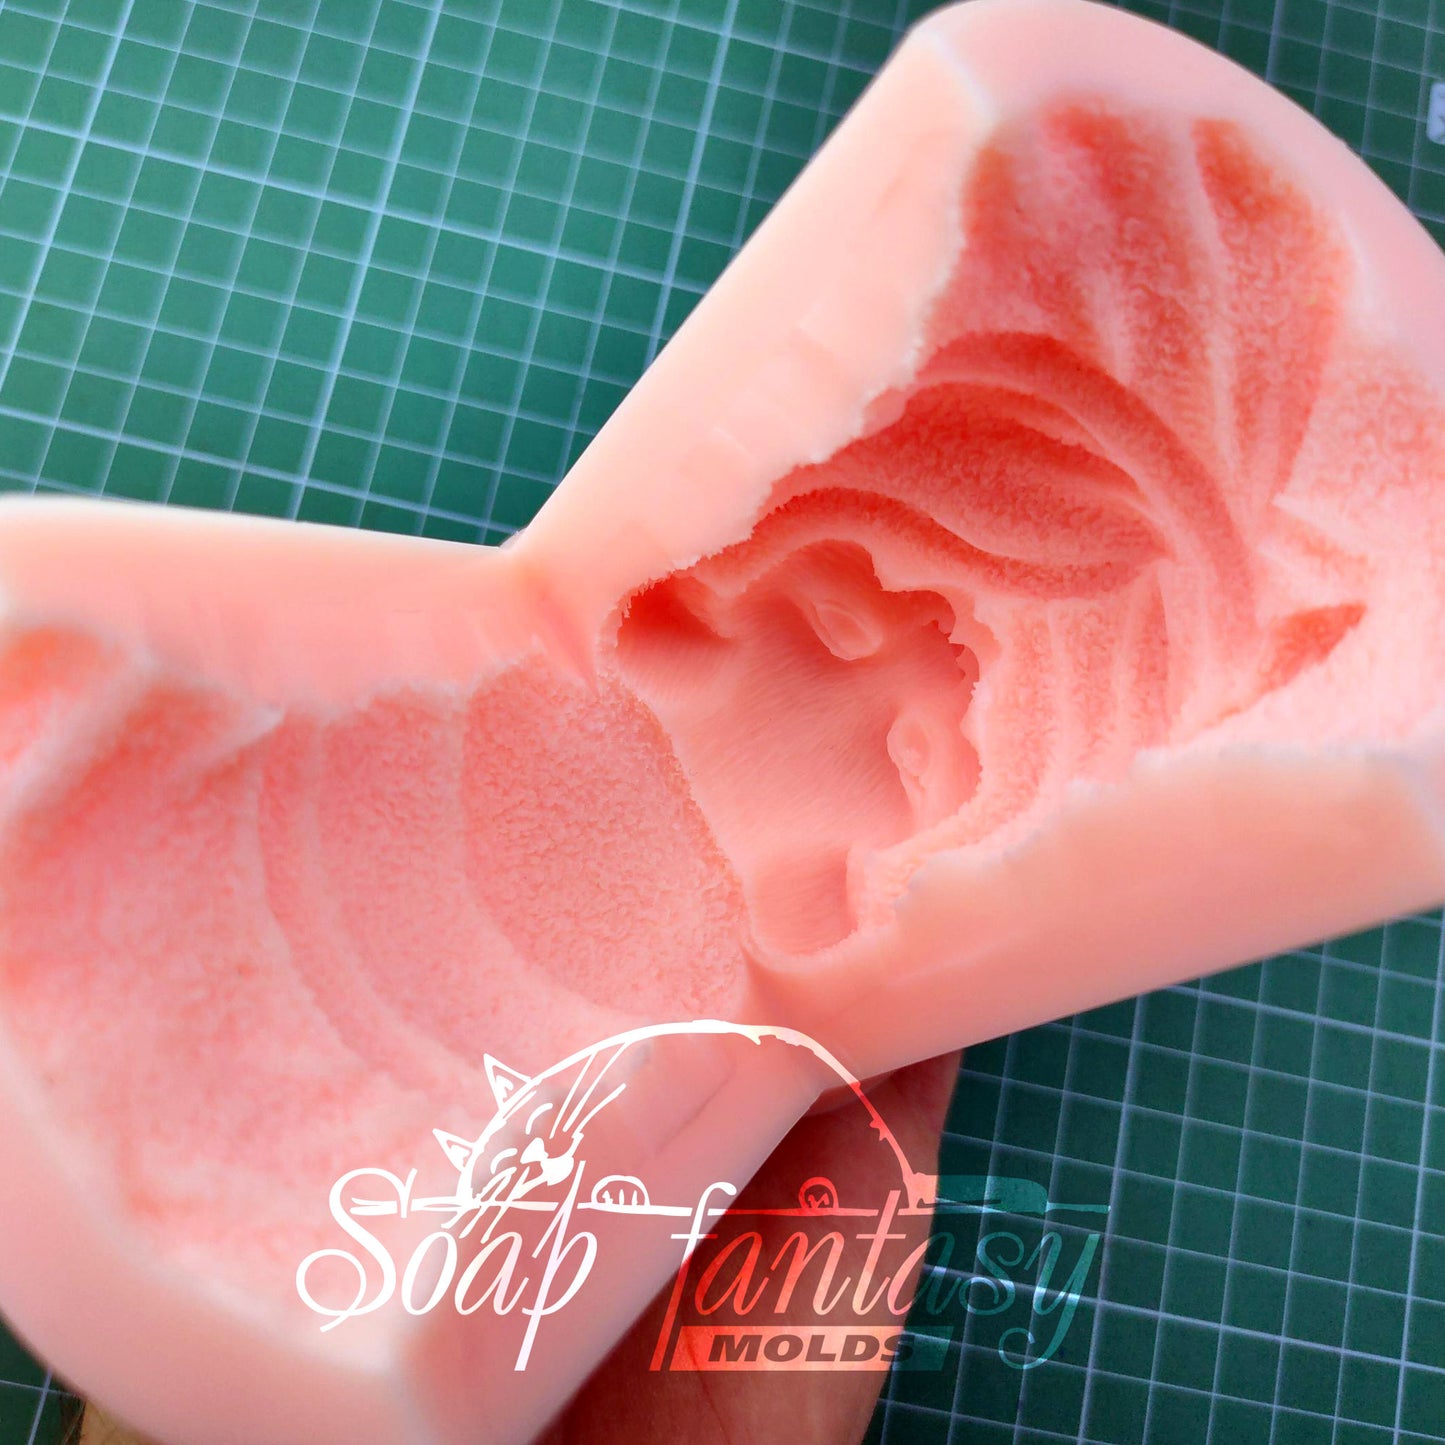 Tiger Cub in a towel silicone mold for soap making